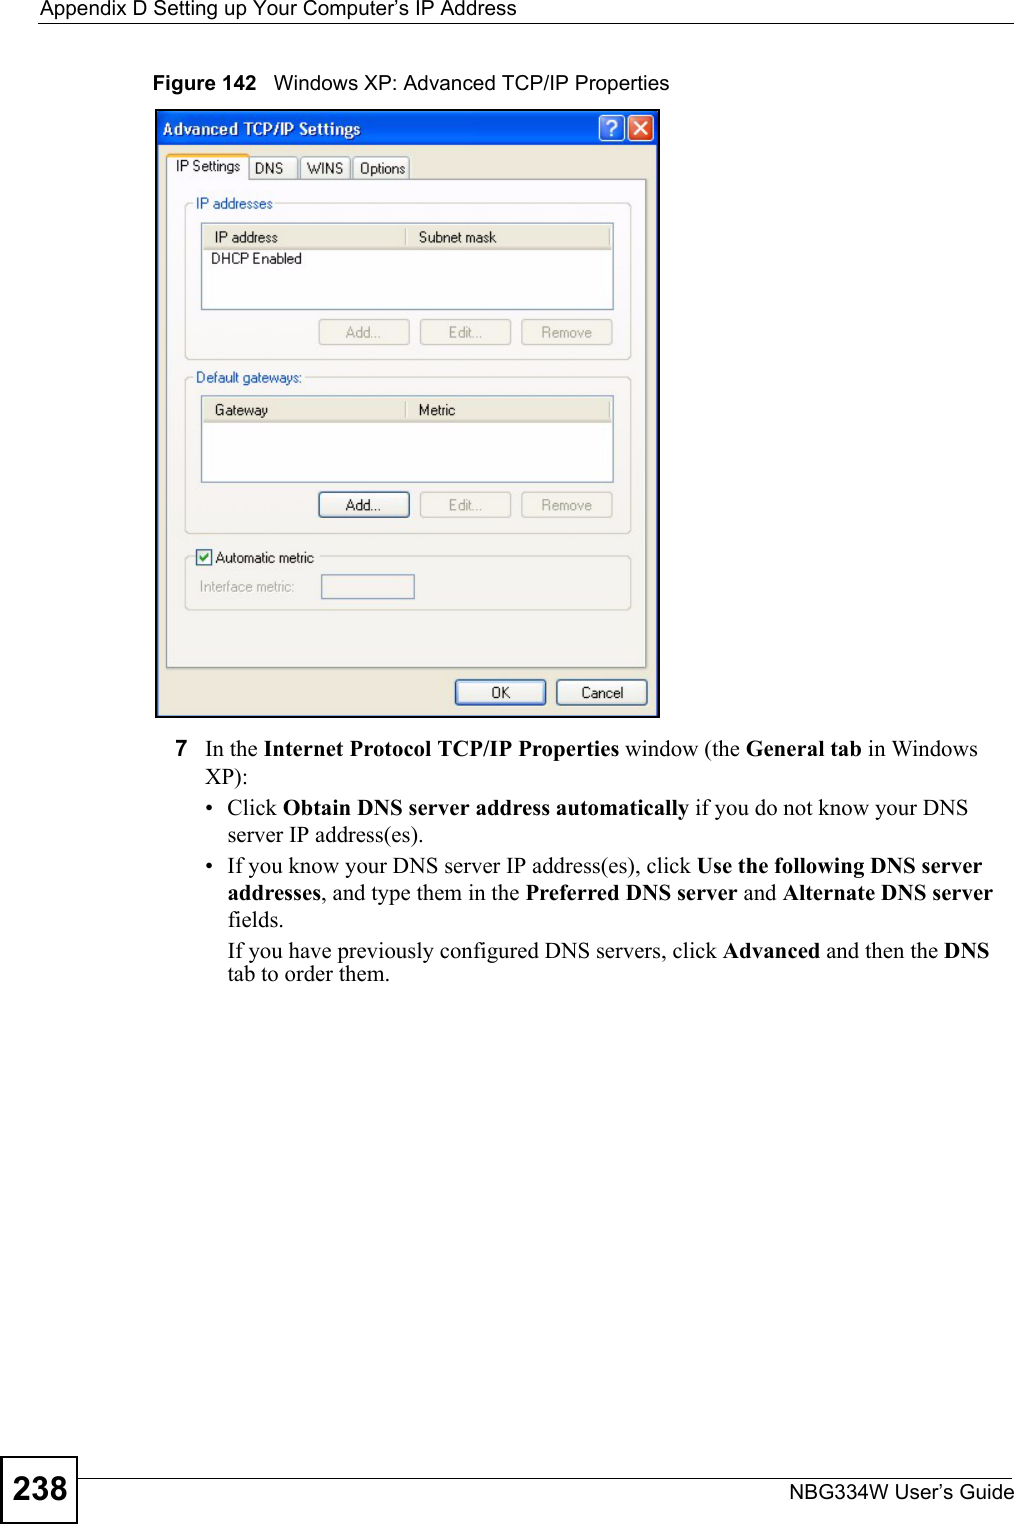 Appendix D Setting up Your Computer’s IP AddressNBG334W User’s Guide238Figure 142   Windows XP: Advanced TCP/IP Properties7In the Internet Protocol TCP/IP Properties window (the General tab in Windows XP):• Click Obtain DNS server address automatically if you do not know your DNS server IP address(es).• If you know your DNS server IP address(es), click Use the following DNS server addresses, and type them in the Preferred DNS server and Alternate DNS server fields. If you have previously configured DNS servers, click Advanced and then the DNS tab to order them.